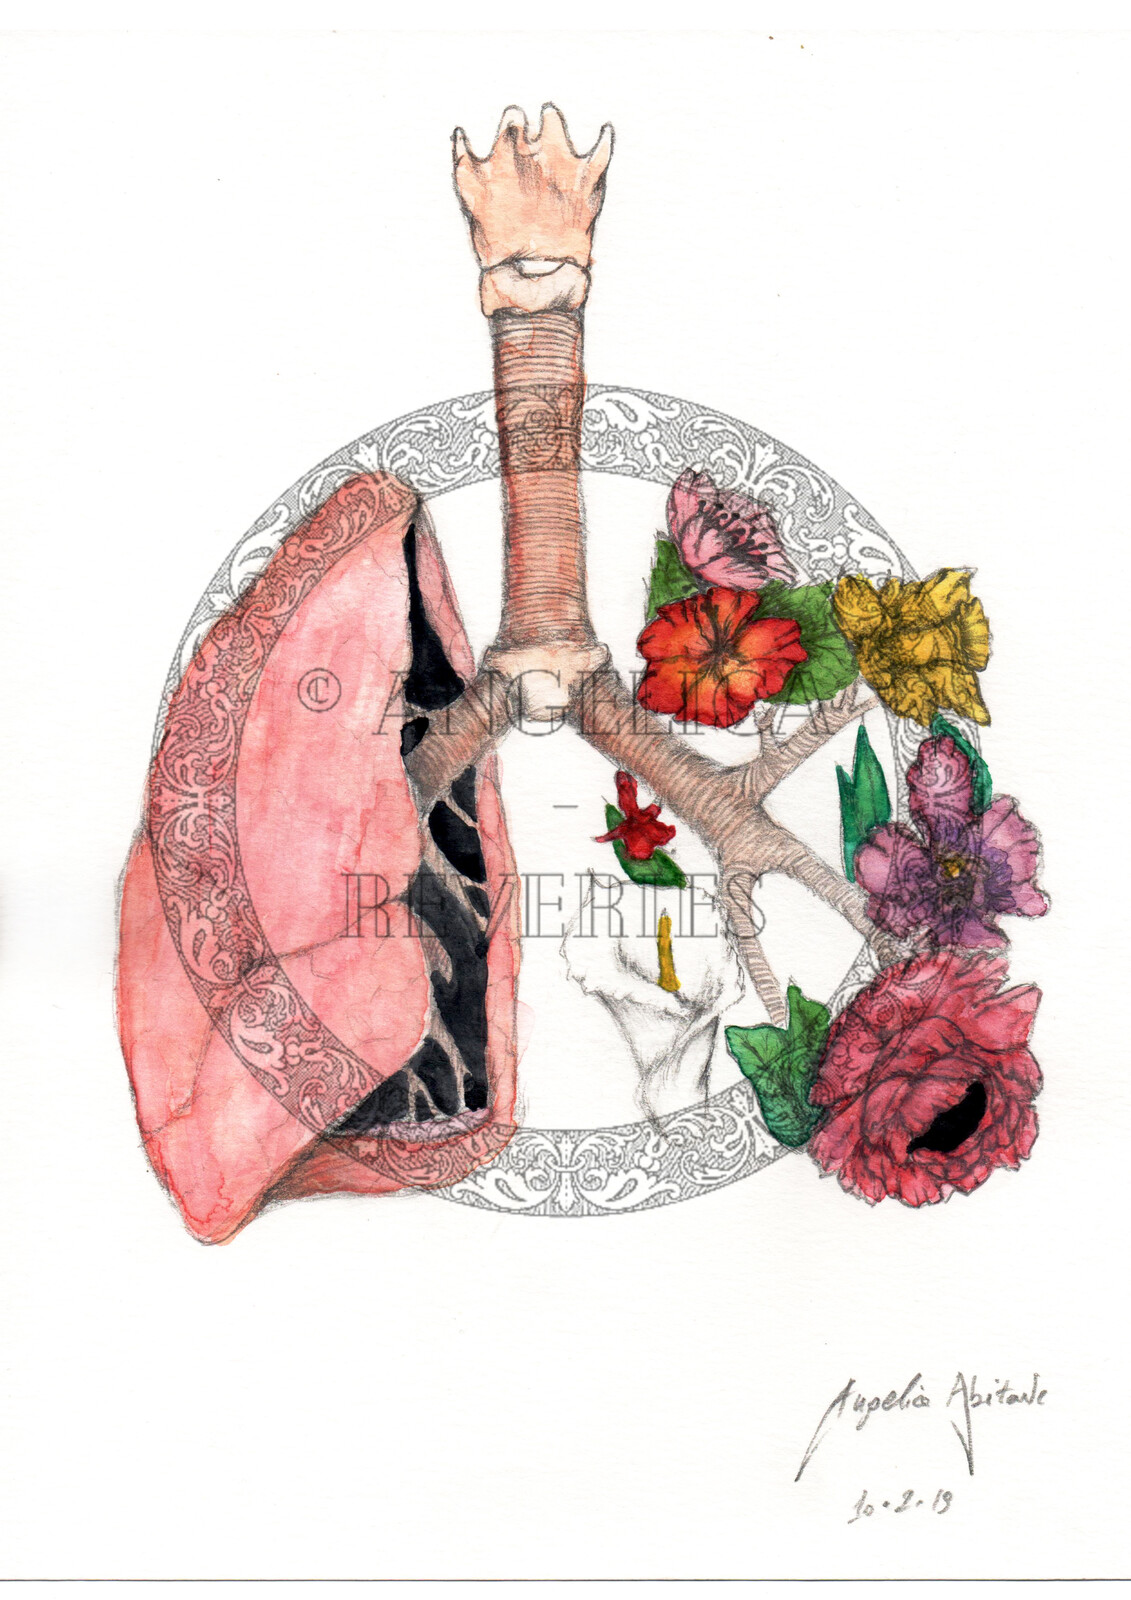 "Breathe"
Anatomical lungs study #1
Pencil and watercolors.

